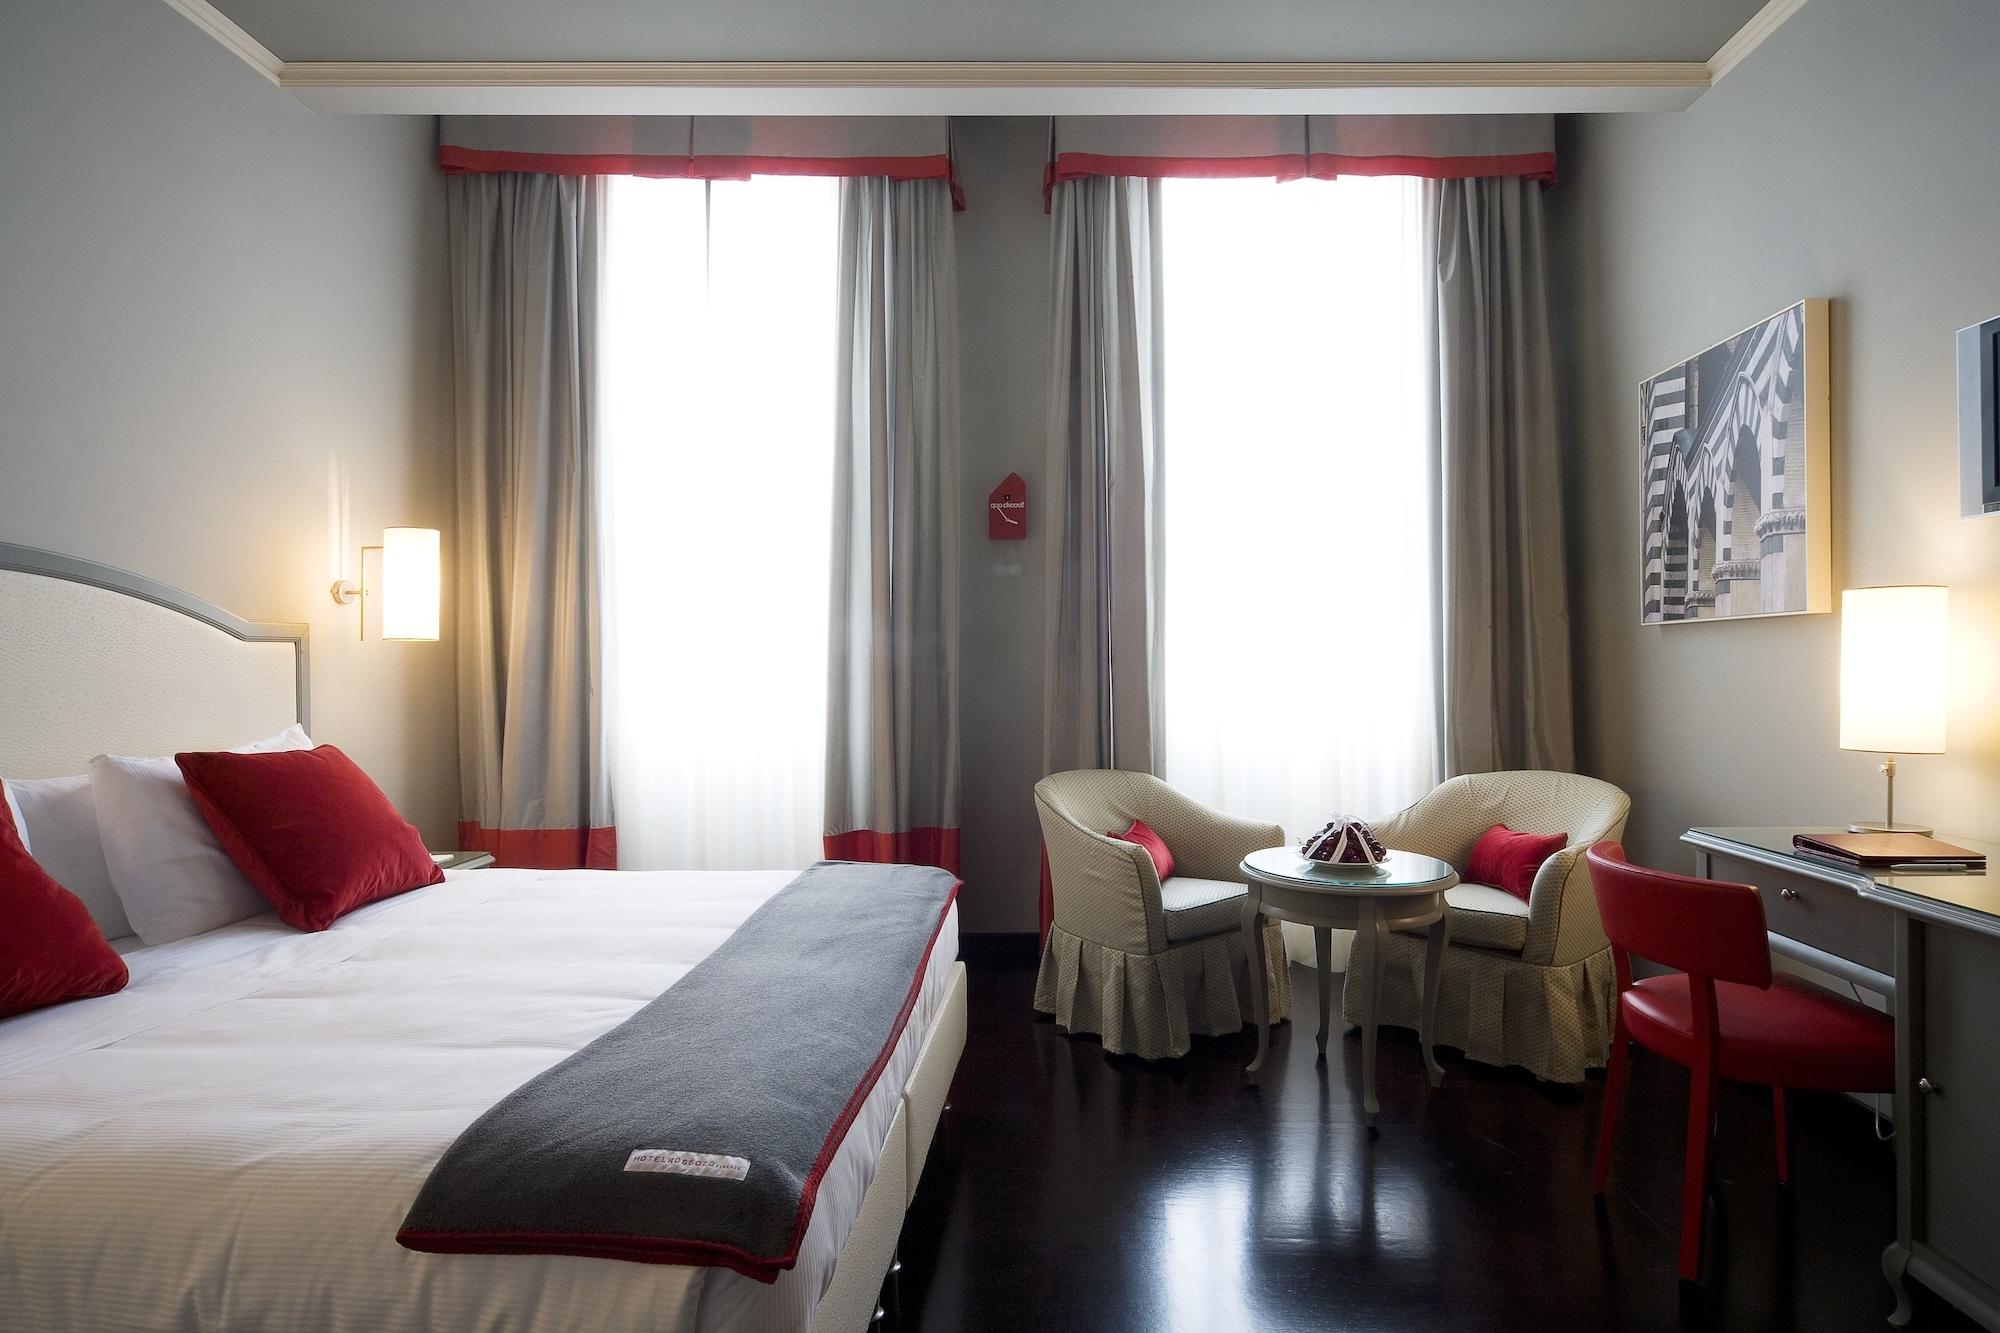 Hotel Rosso23 - Wtb Hotels Florence Room photo